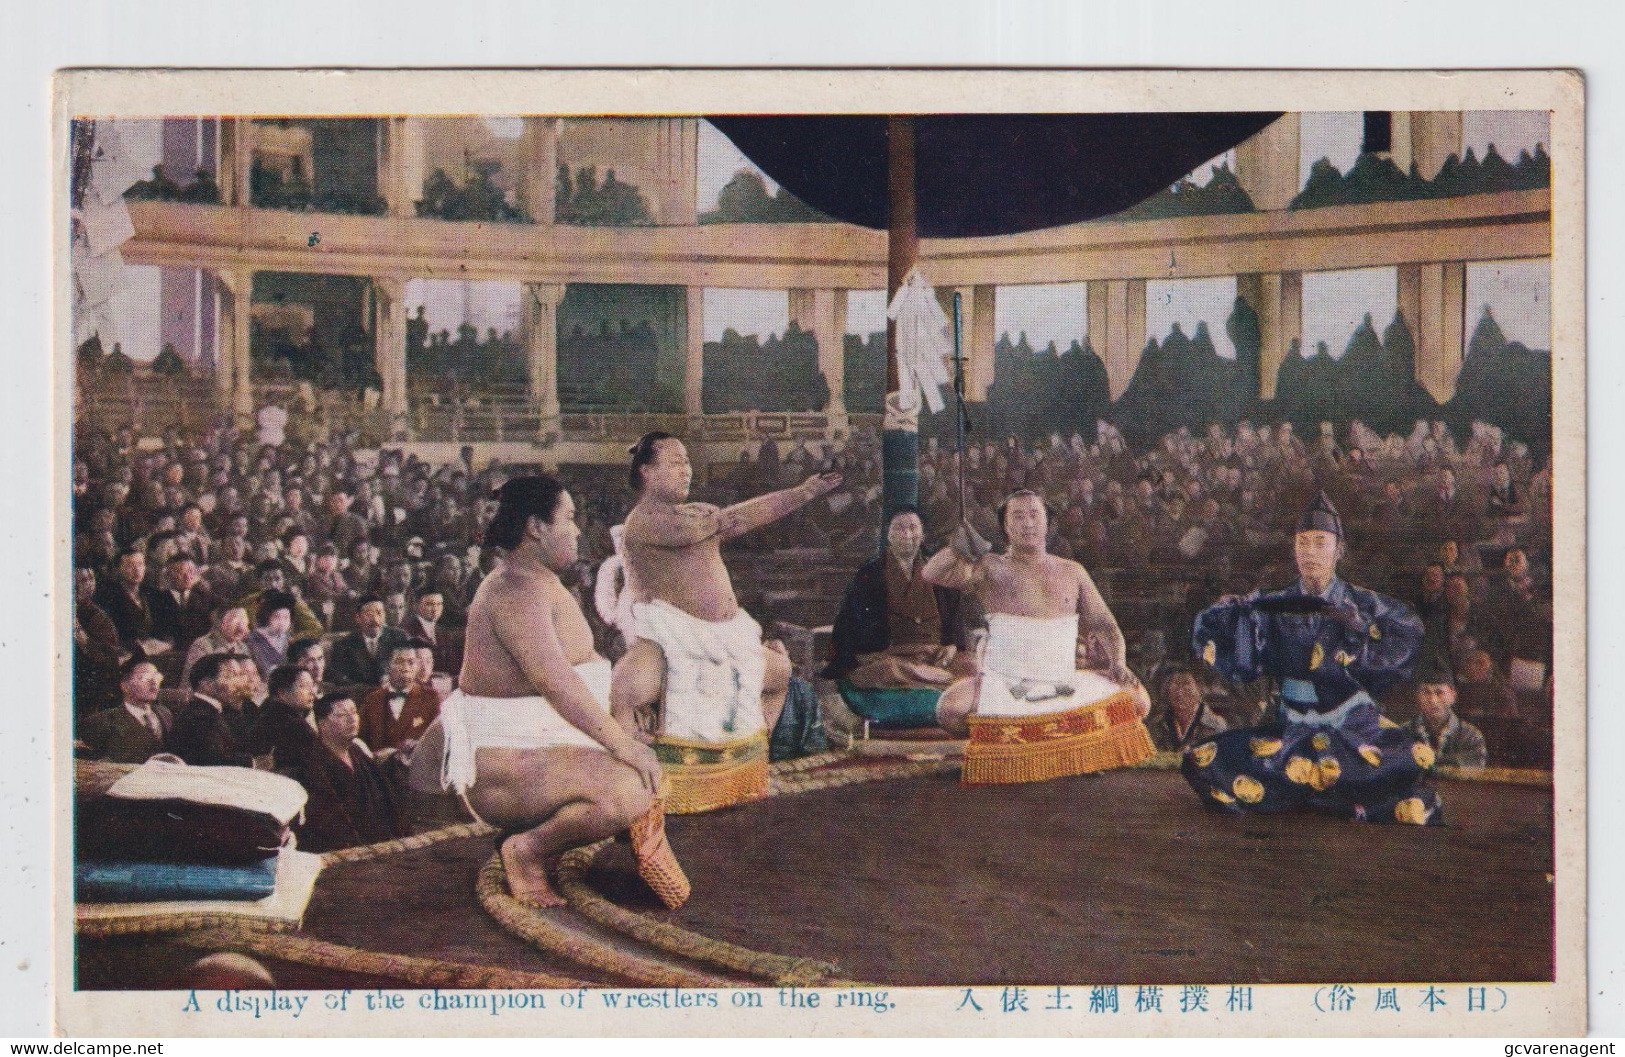 SUMO  YOKOZUMA   1912  A DISPLAY OF THE CHAMPION OF WRESLERS ON THE RING - Oosterse Gevechtssporten